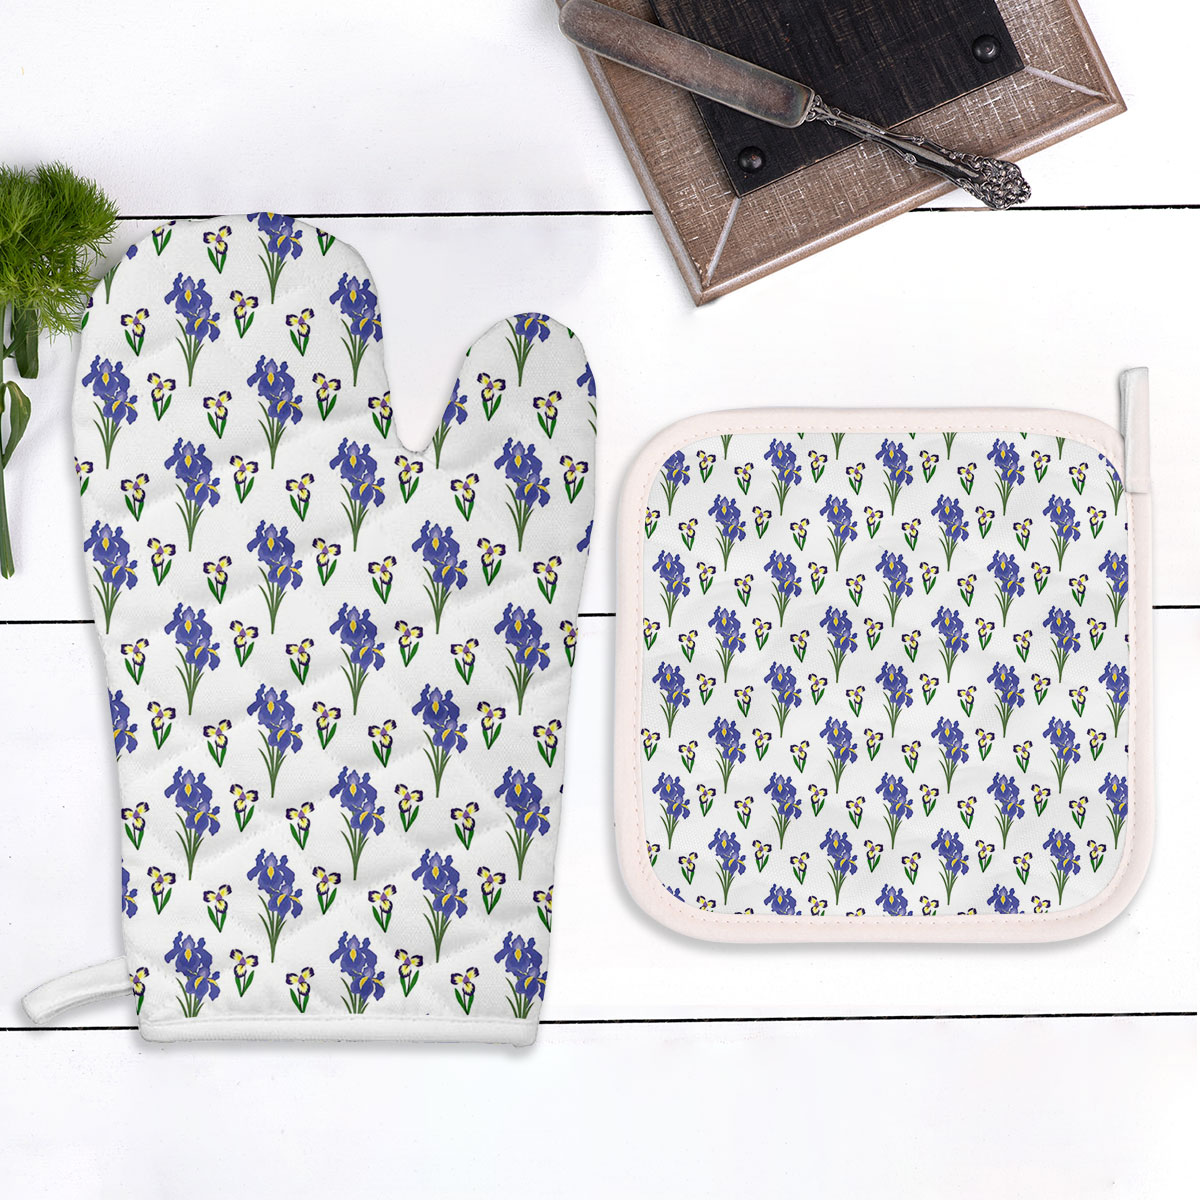 Iris Flower And Leaf Seamless Pattern Oven Mitts Pot Holder Set